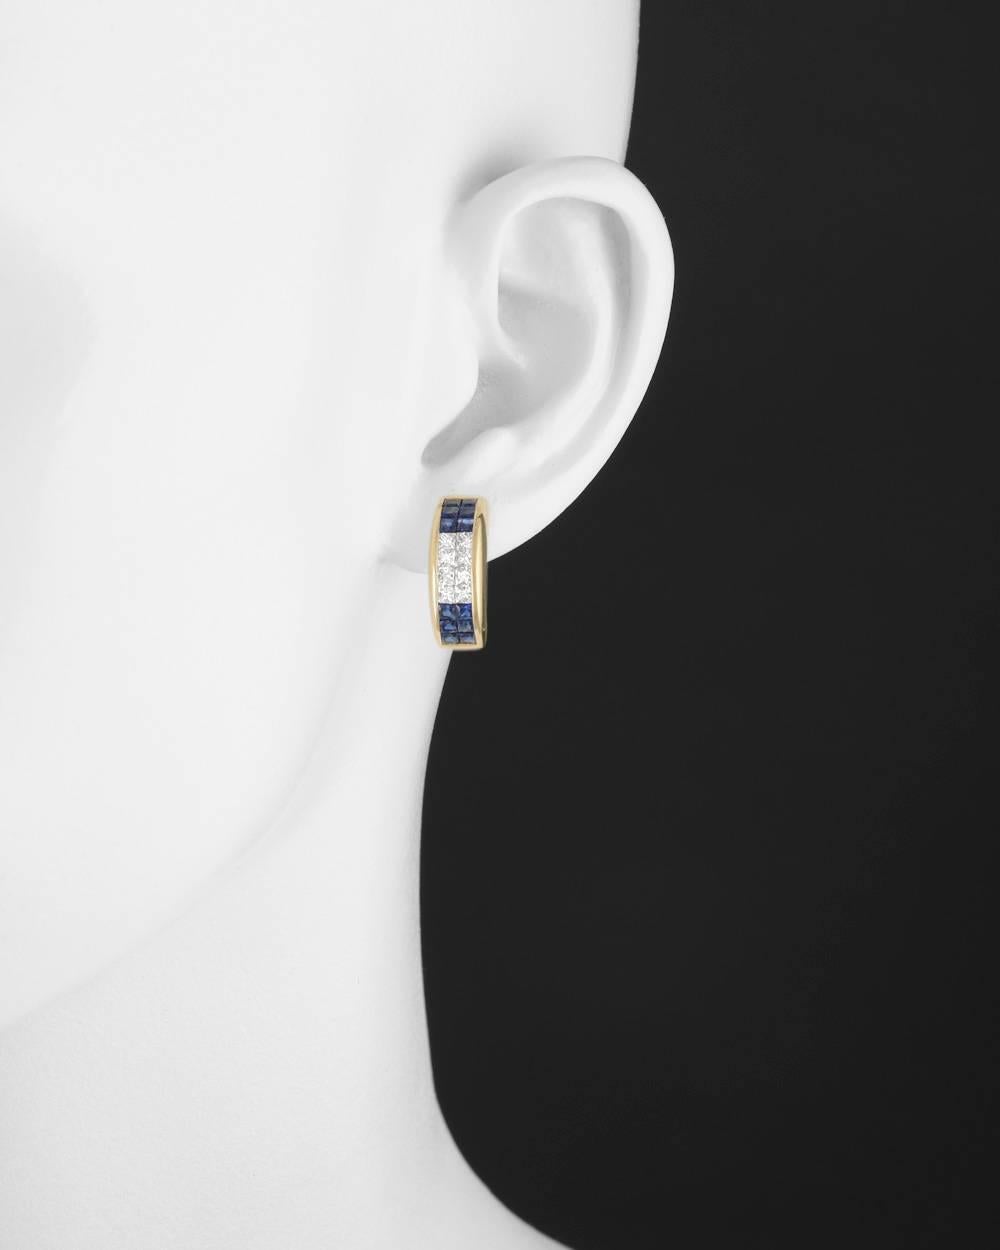 Sapphire and diamond half hoop earrings, designed as invisibly set square-cut blue sapphires weighing 2.05 total carats and radiant-cut diamonds weighing 0.90 total carats, in 18k yellow gold. With post backs. 0.71